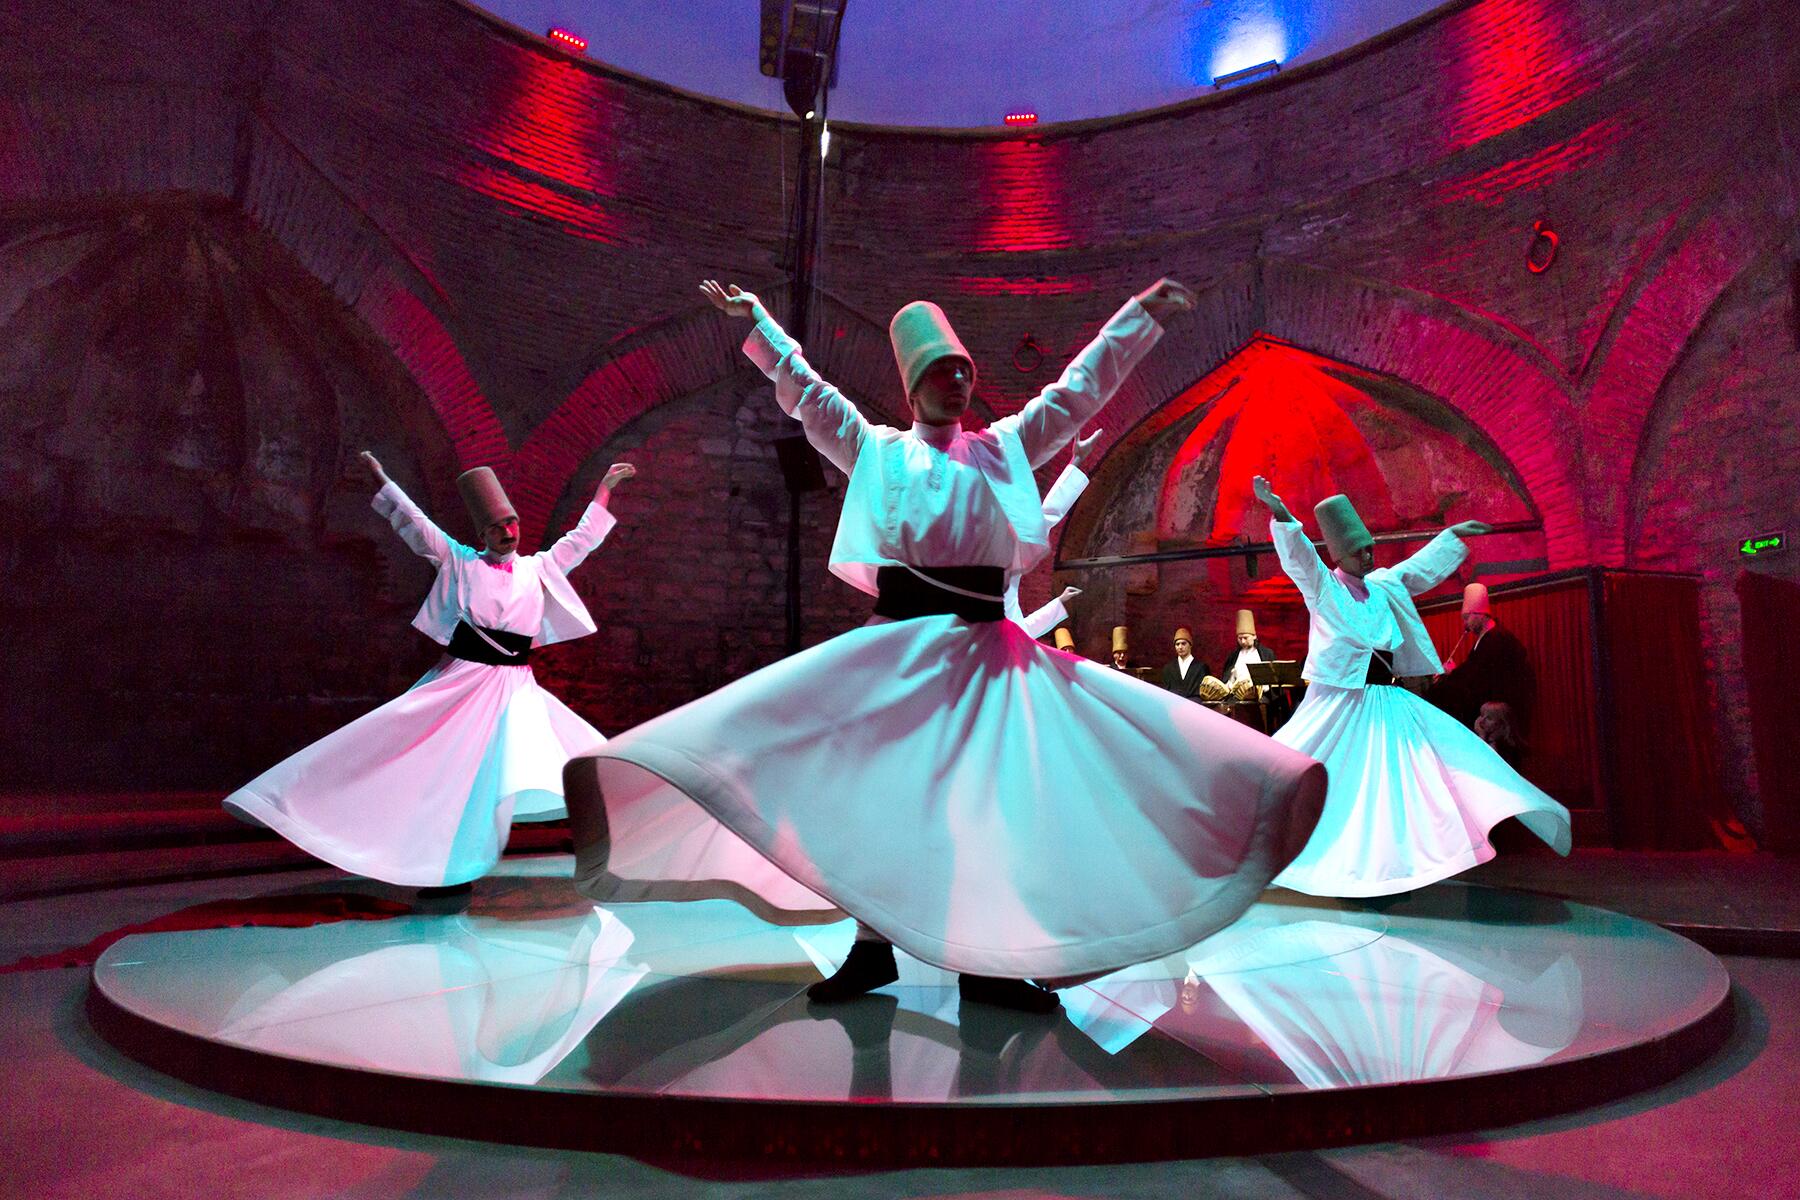 16 Dances Around The World To Get You Grooving